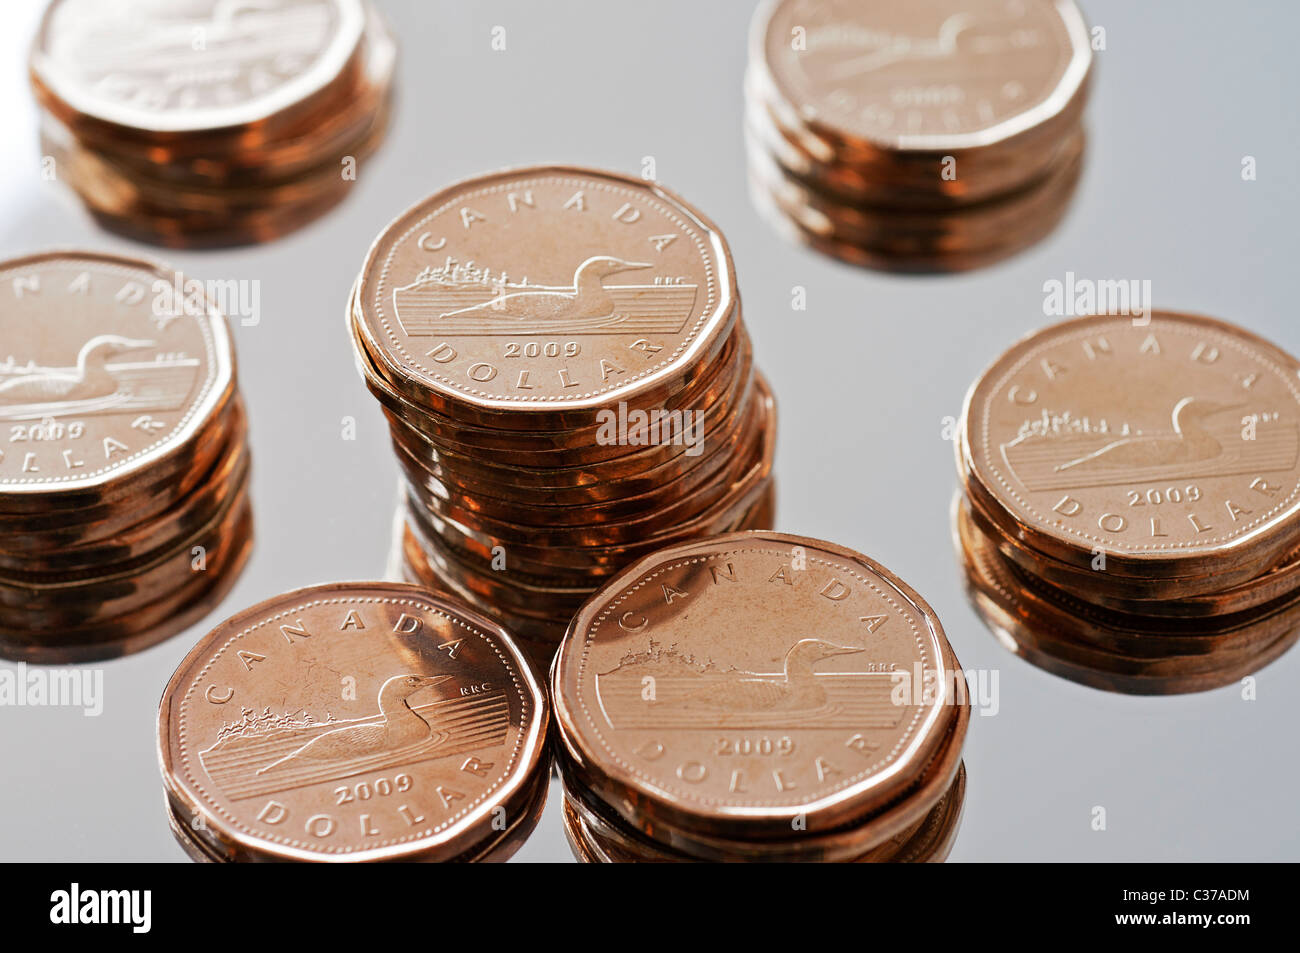 Canadian money; one dollar ($1) coins commonly known as loonies